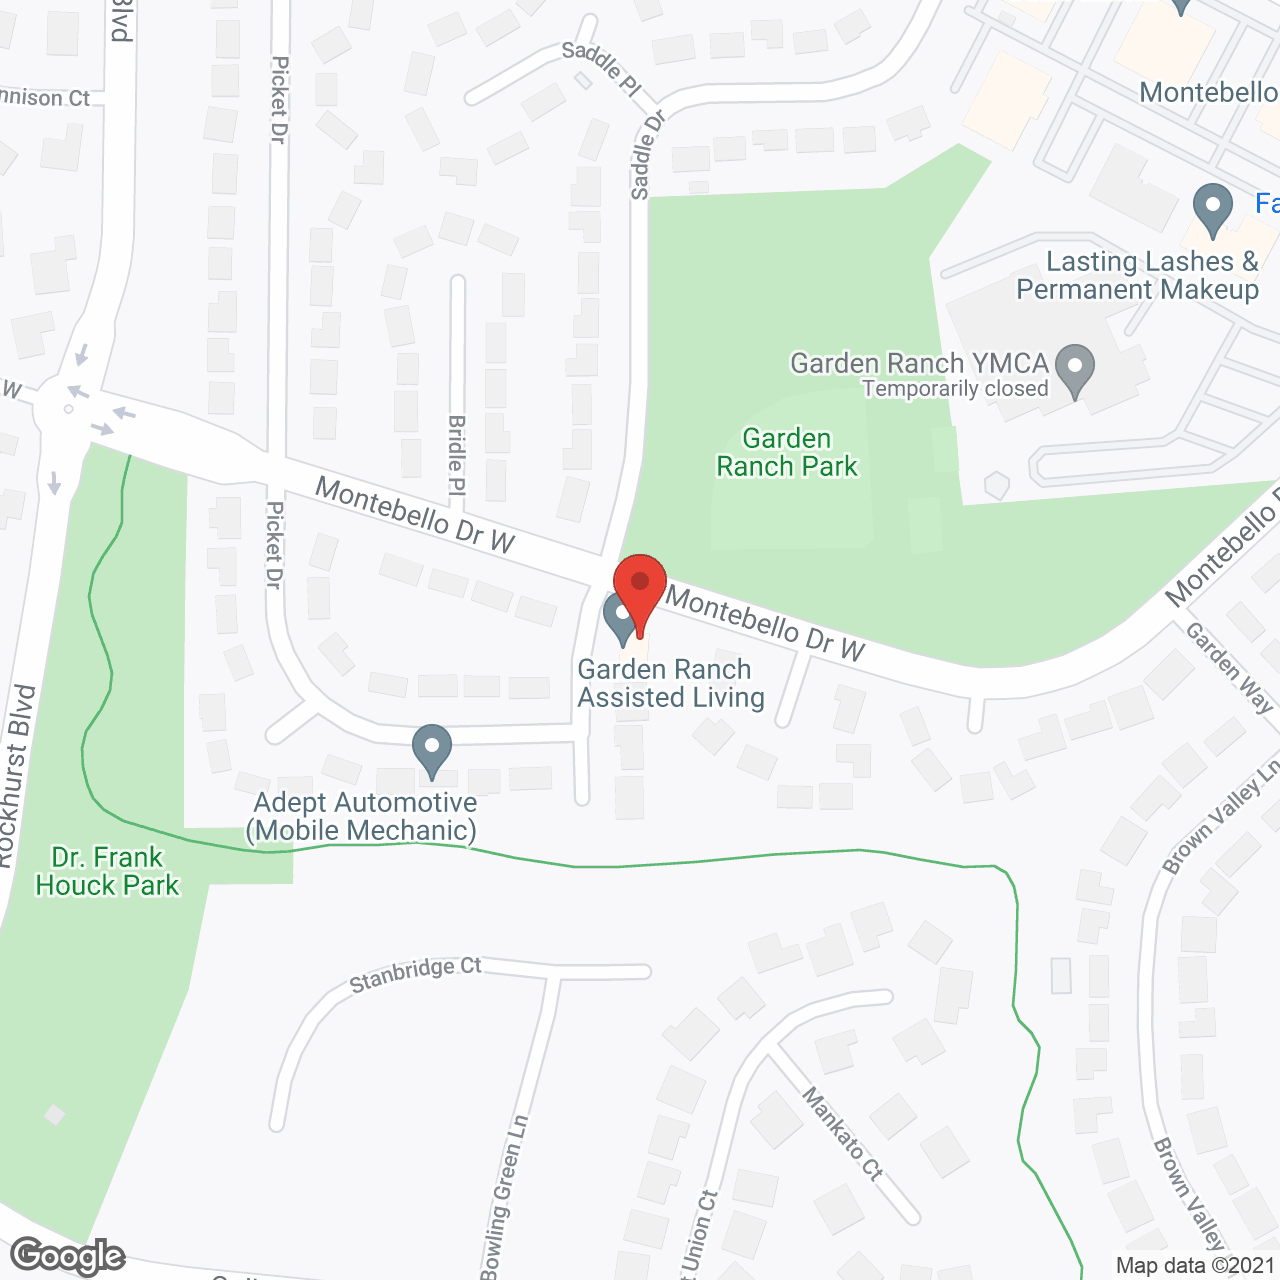 Garden Ranch Assisted Living in google map